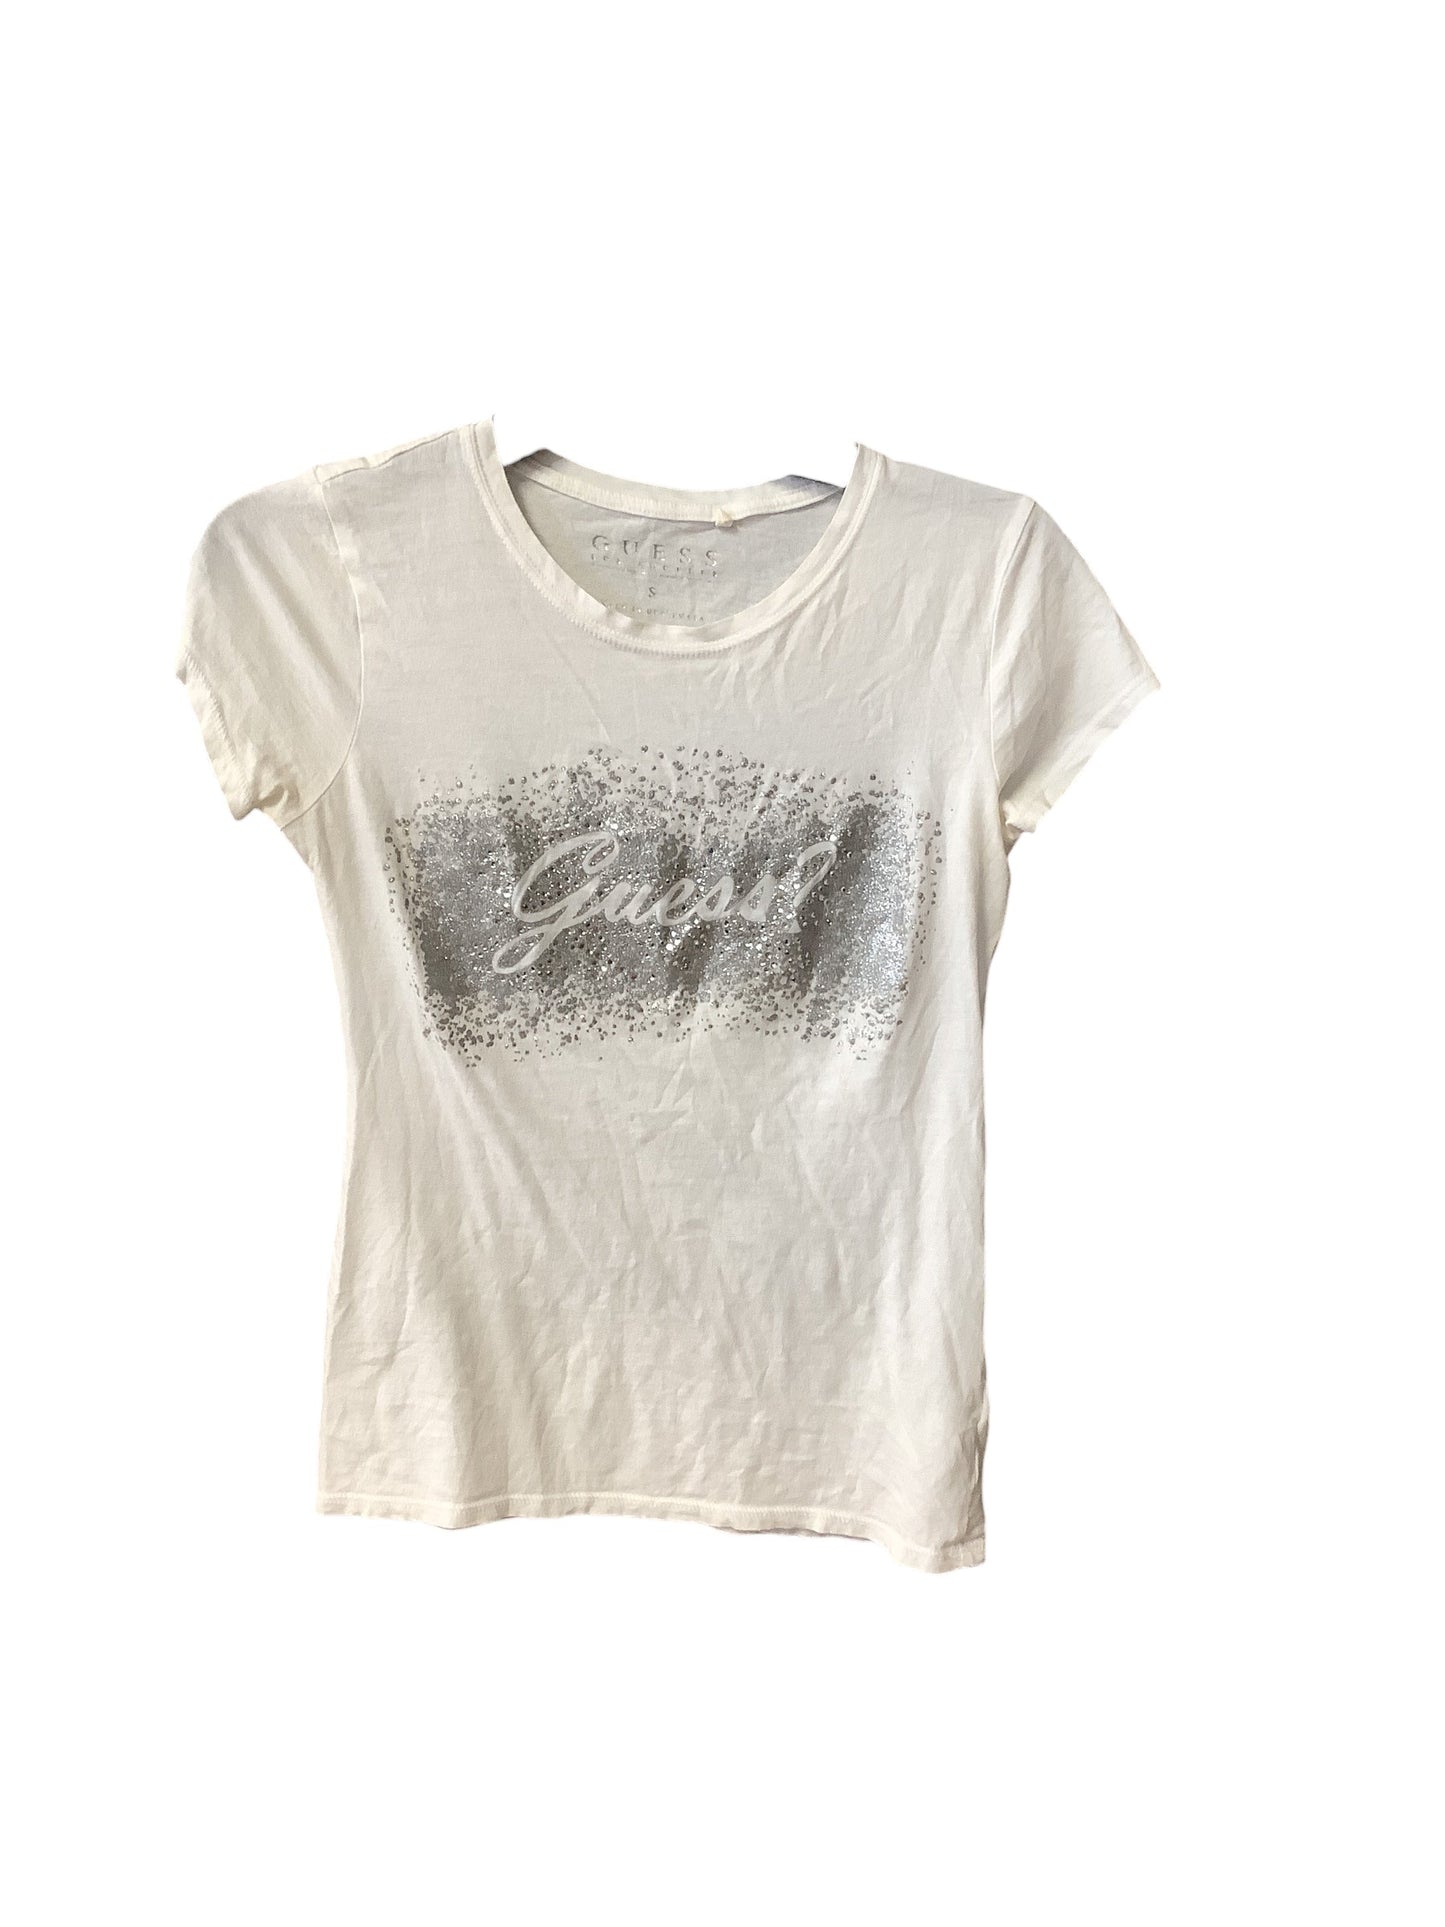 White Top Short Sleeve Guess, Size S